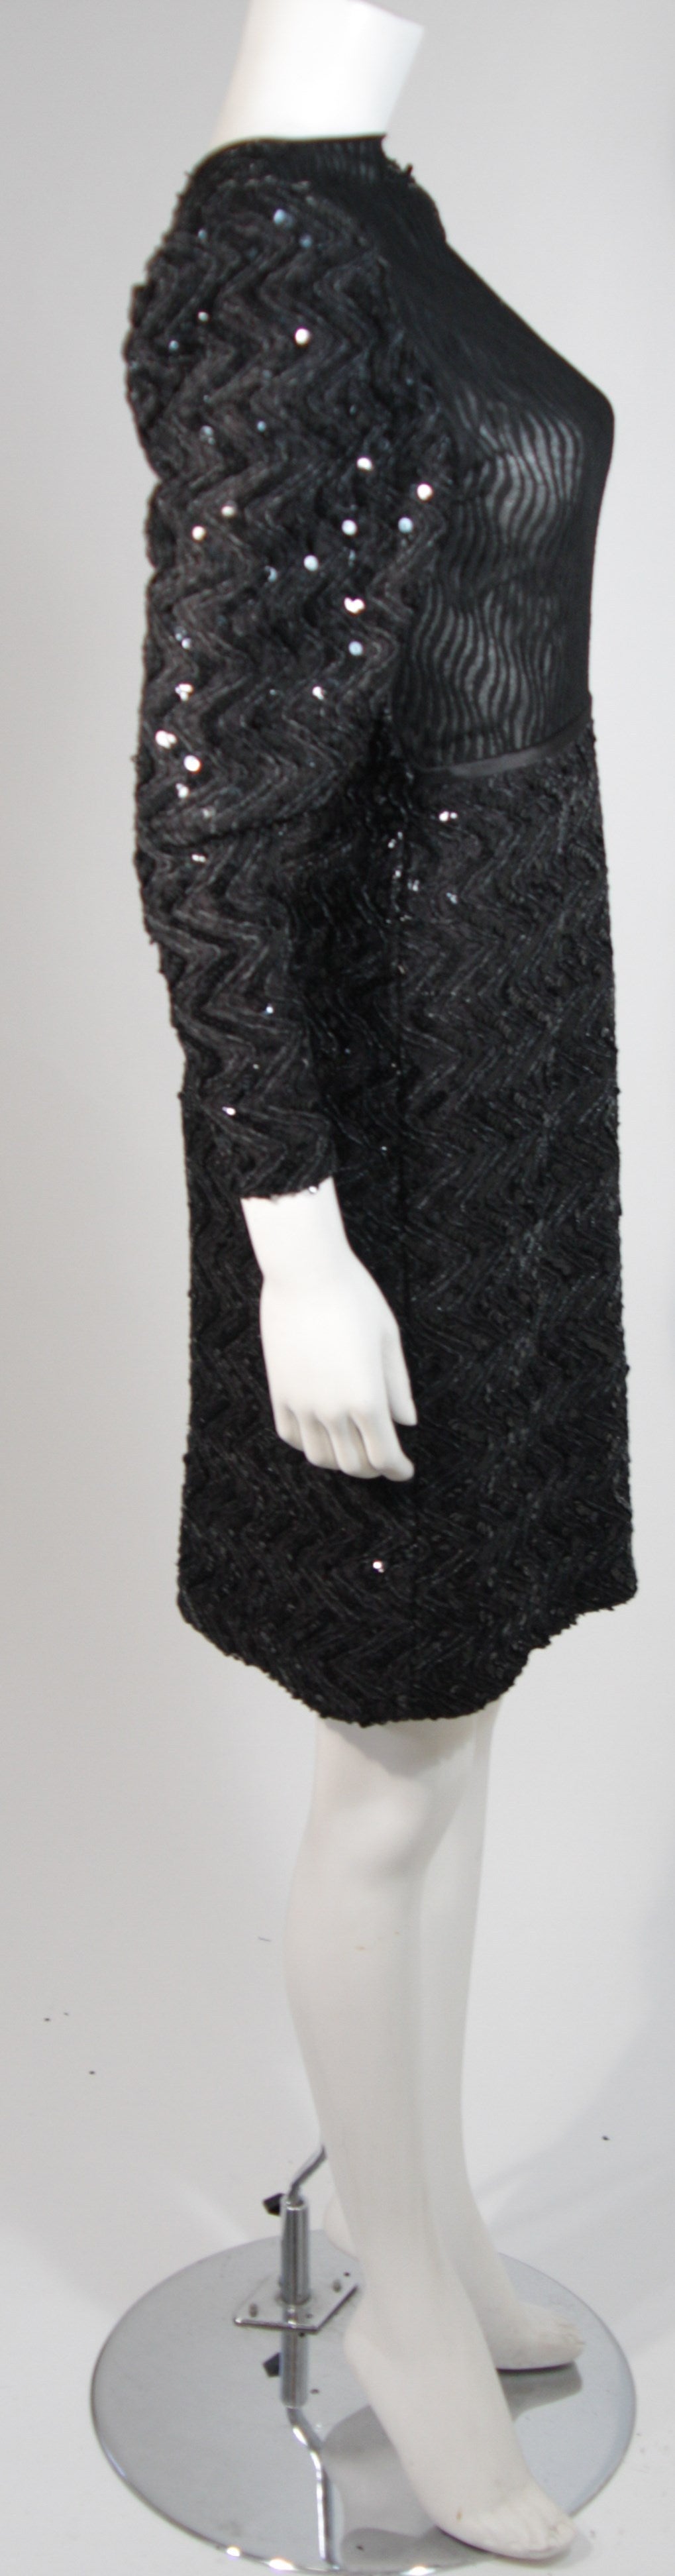 Vicky Tiel Attributed Black Sequin Cocktail Dress Size Small For Sale 3